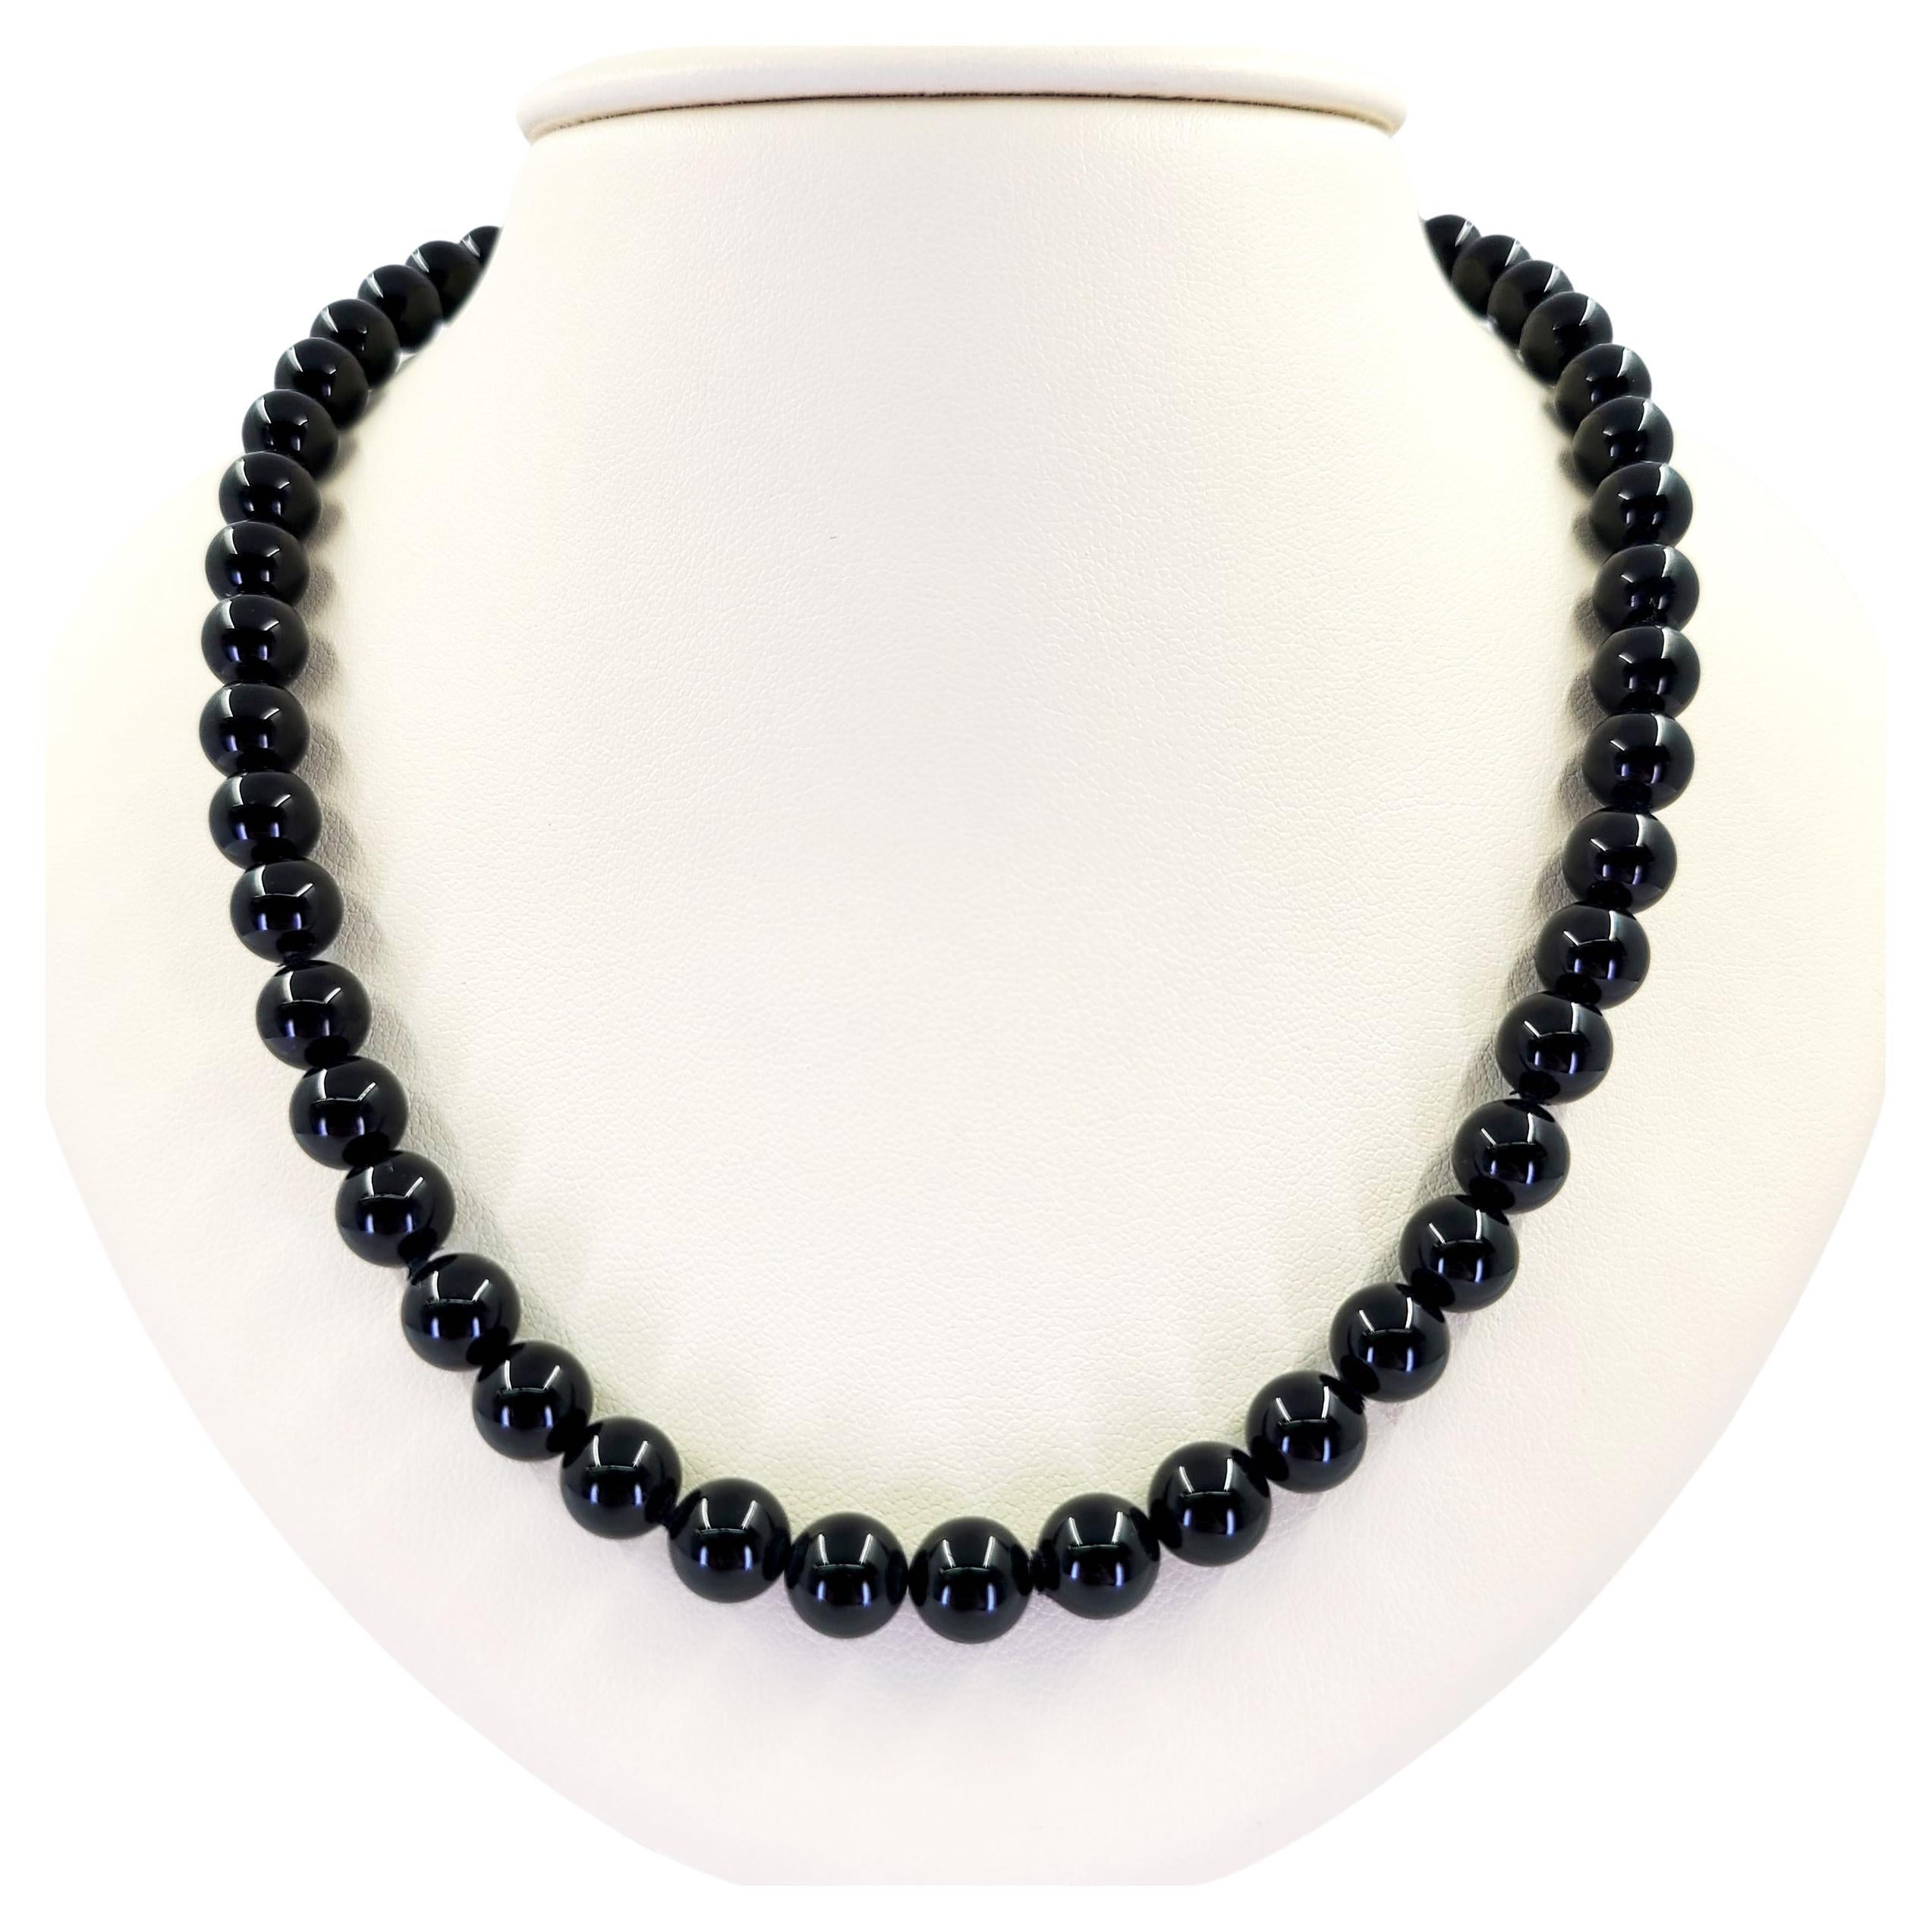 Tiffany & Co. Sterling Silver and Onyx Bead Necklace